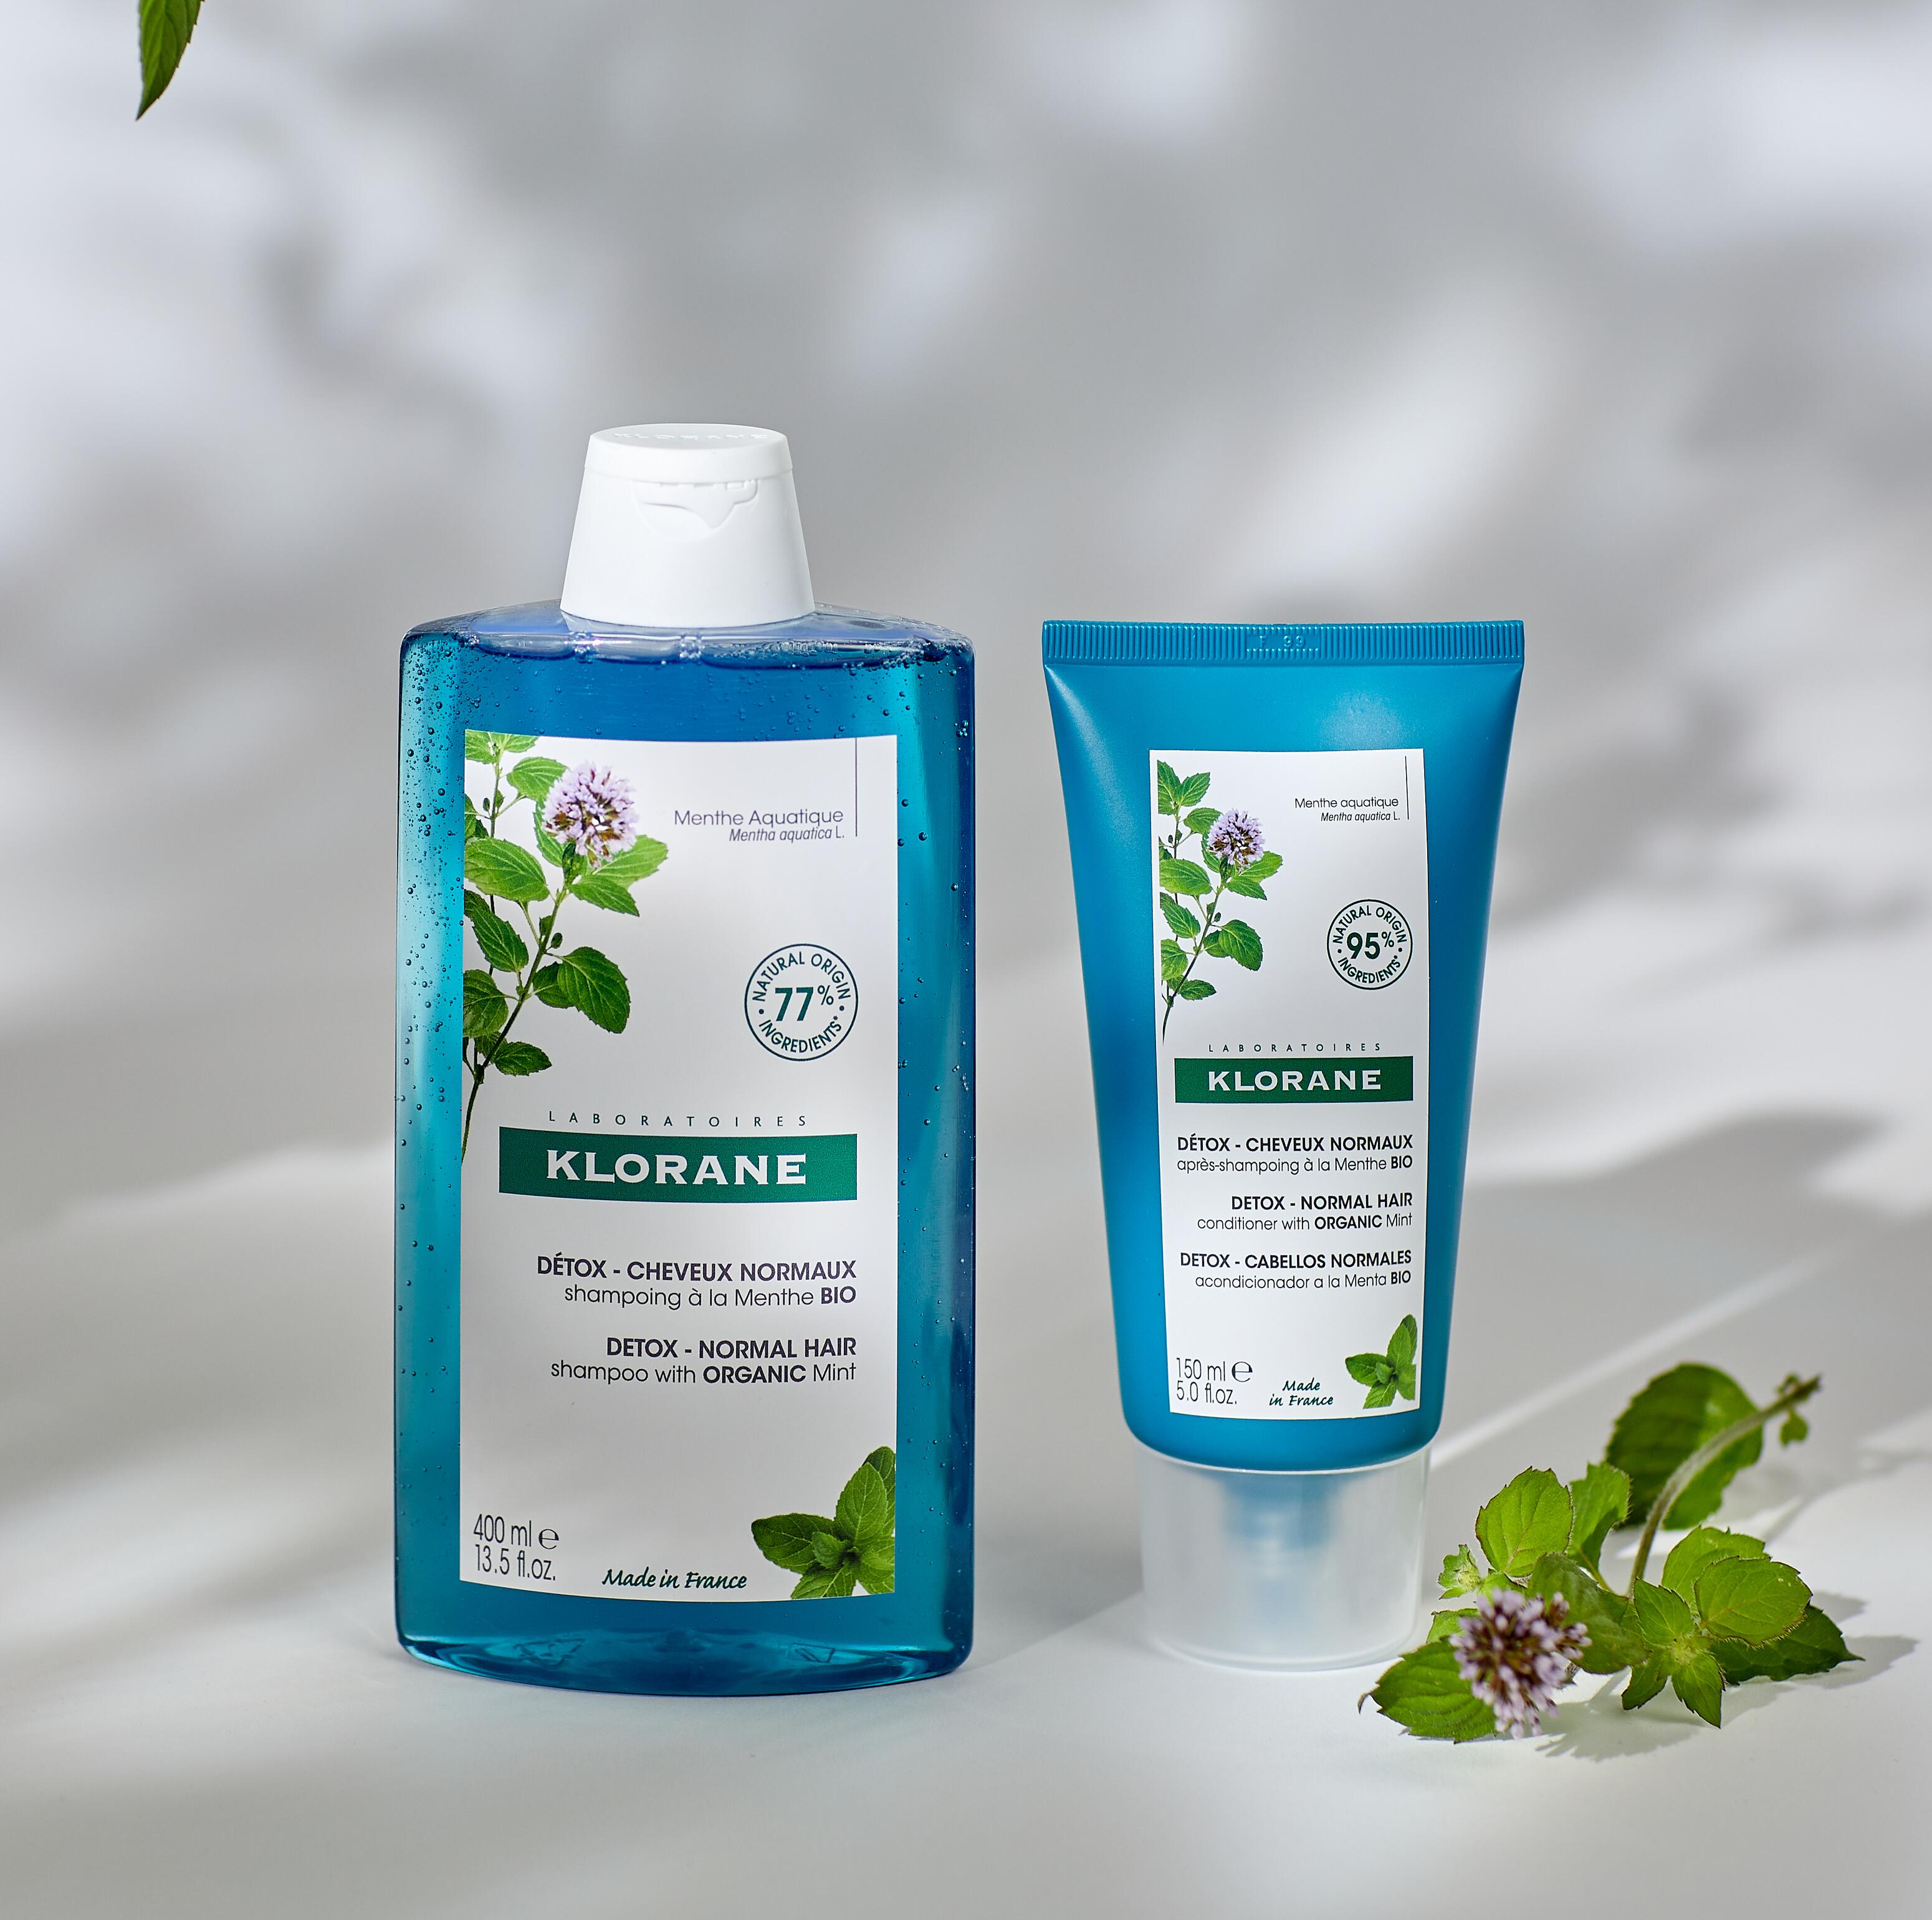 kl_ hair_organic mint shampoo_conditioner_naturalization_400 ml_picture_2021